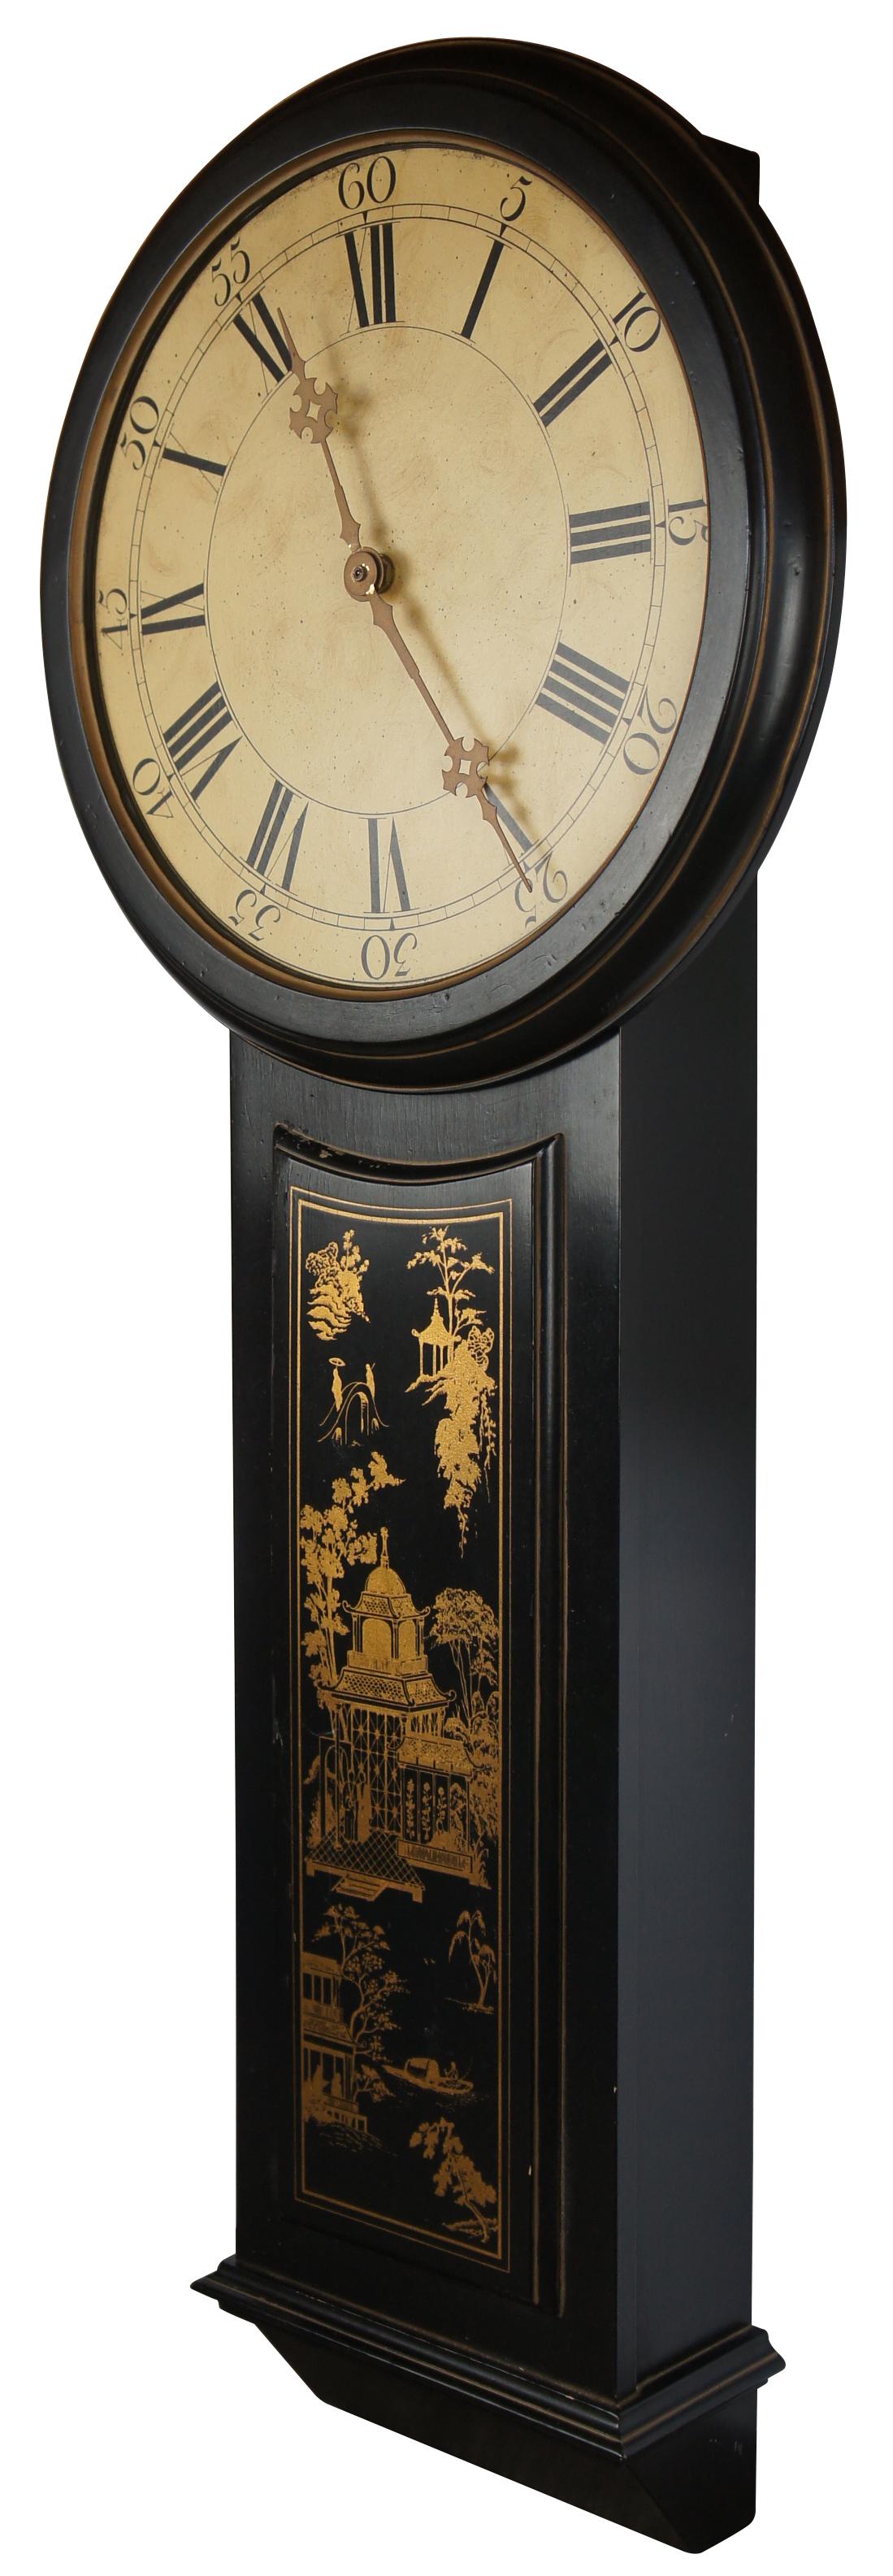 George III style Black & Gold chinoiserie wall clock. Made in the form of a Tavern or Act of Parliament Clock. Front panel features a water scene with pagodas and figures. Features a round face with roman numeral and gold painted hands. Battery